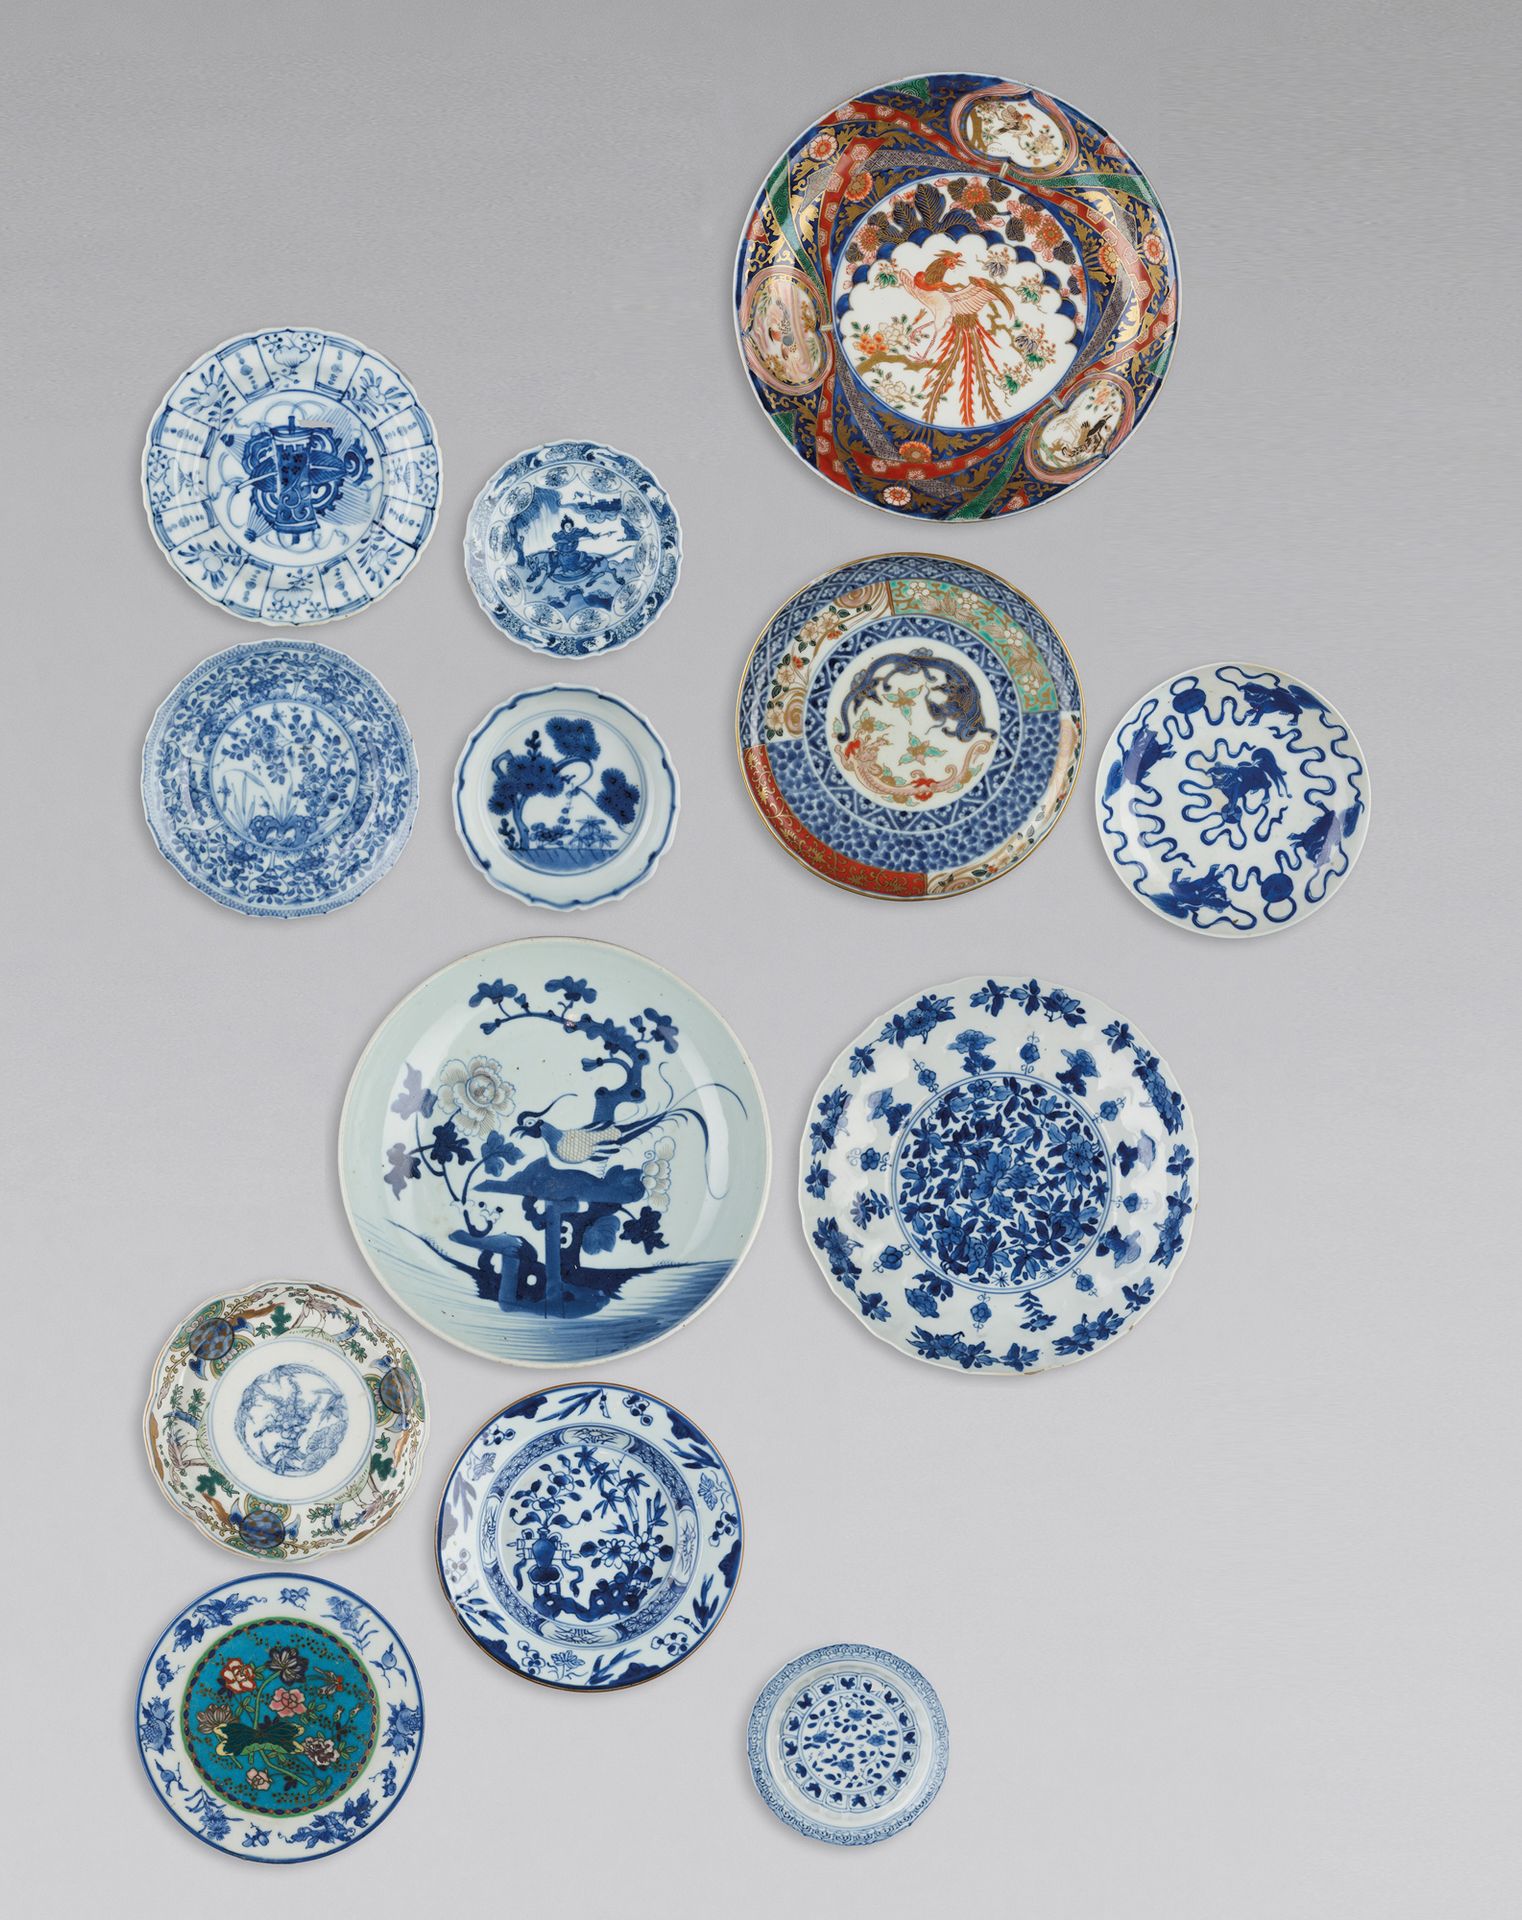 A GROUP OF 13 PORCELAIN PLATES A GROUP OF 13 PORCELAIN PLATES
Japan and China, K&hellip;